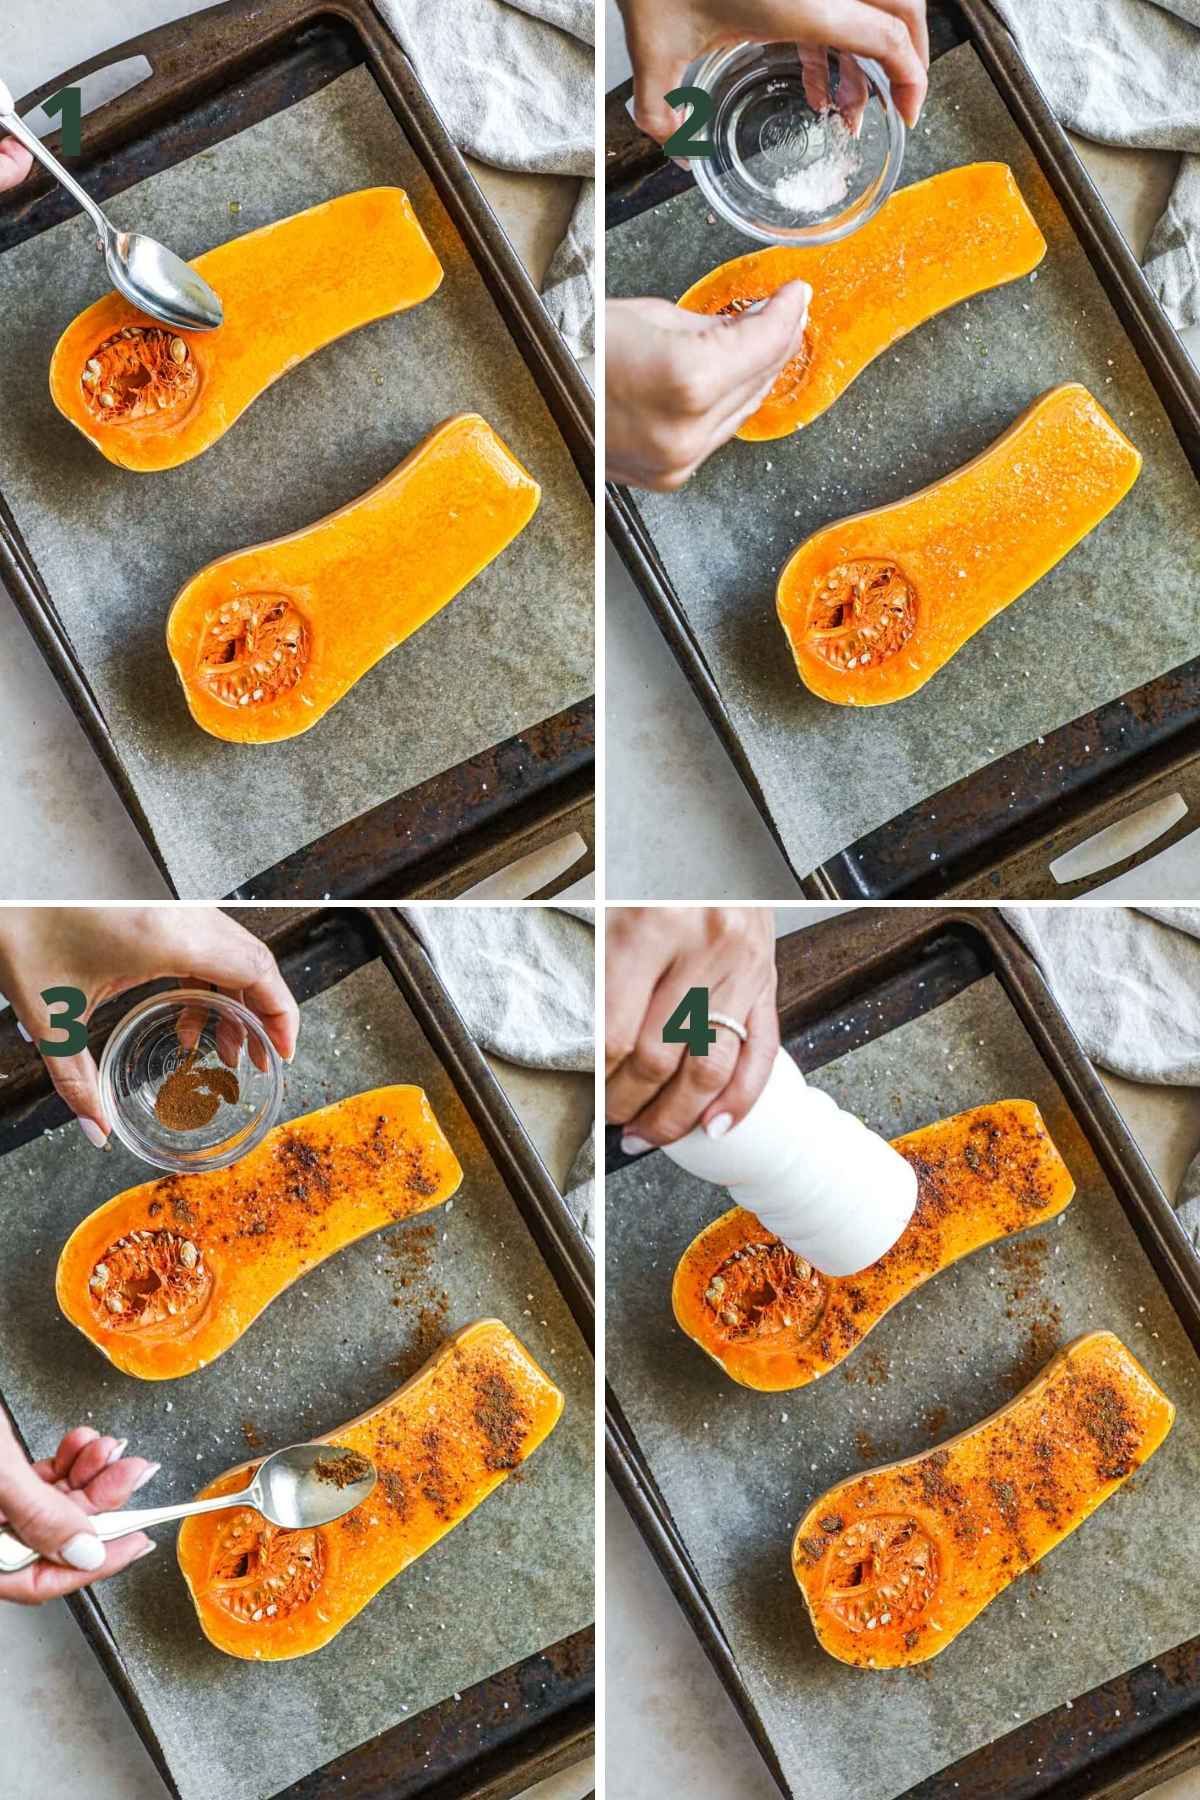 Steps to make butternut squash, including rubbing the squash with olive oil and seasoning with salt, cinnamon, and pepper.